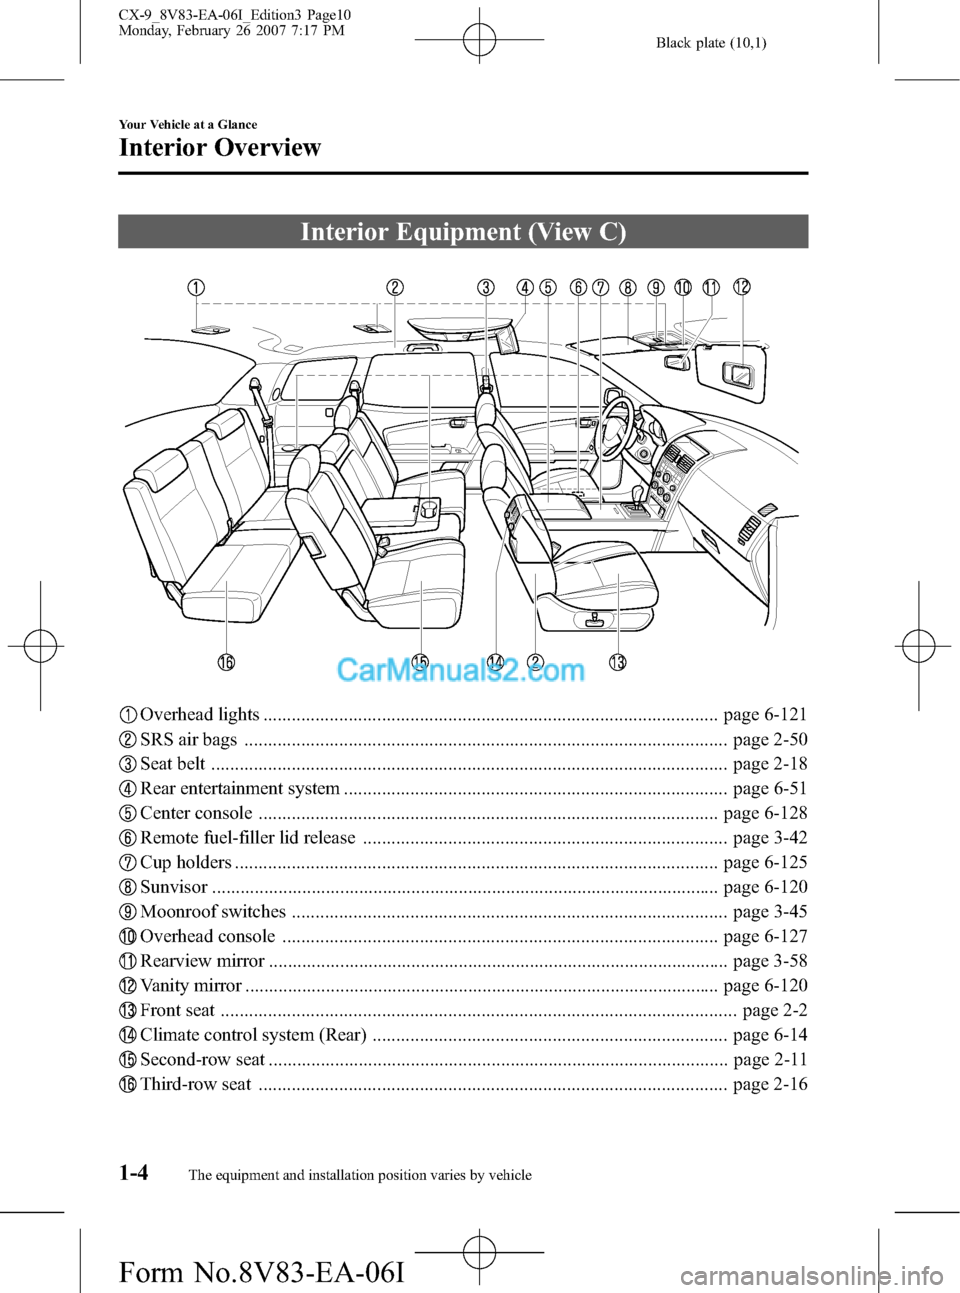 MAZDA MODEL CX-9 2007  Owners Manual (in English) Black plate (10,1)
Interior Equipment (View C)
Overhead lights ................................................................................................ page 6-121
SRS air bags ................